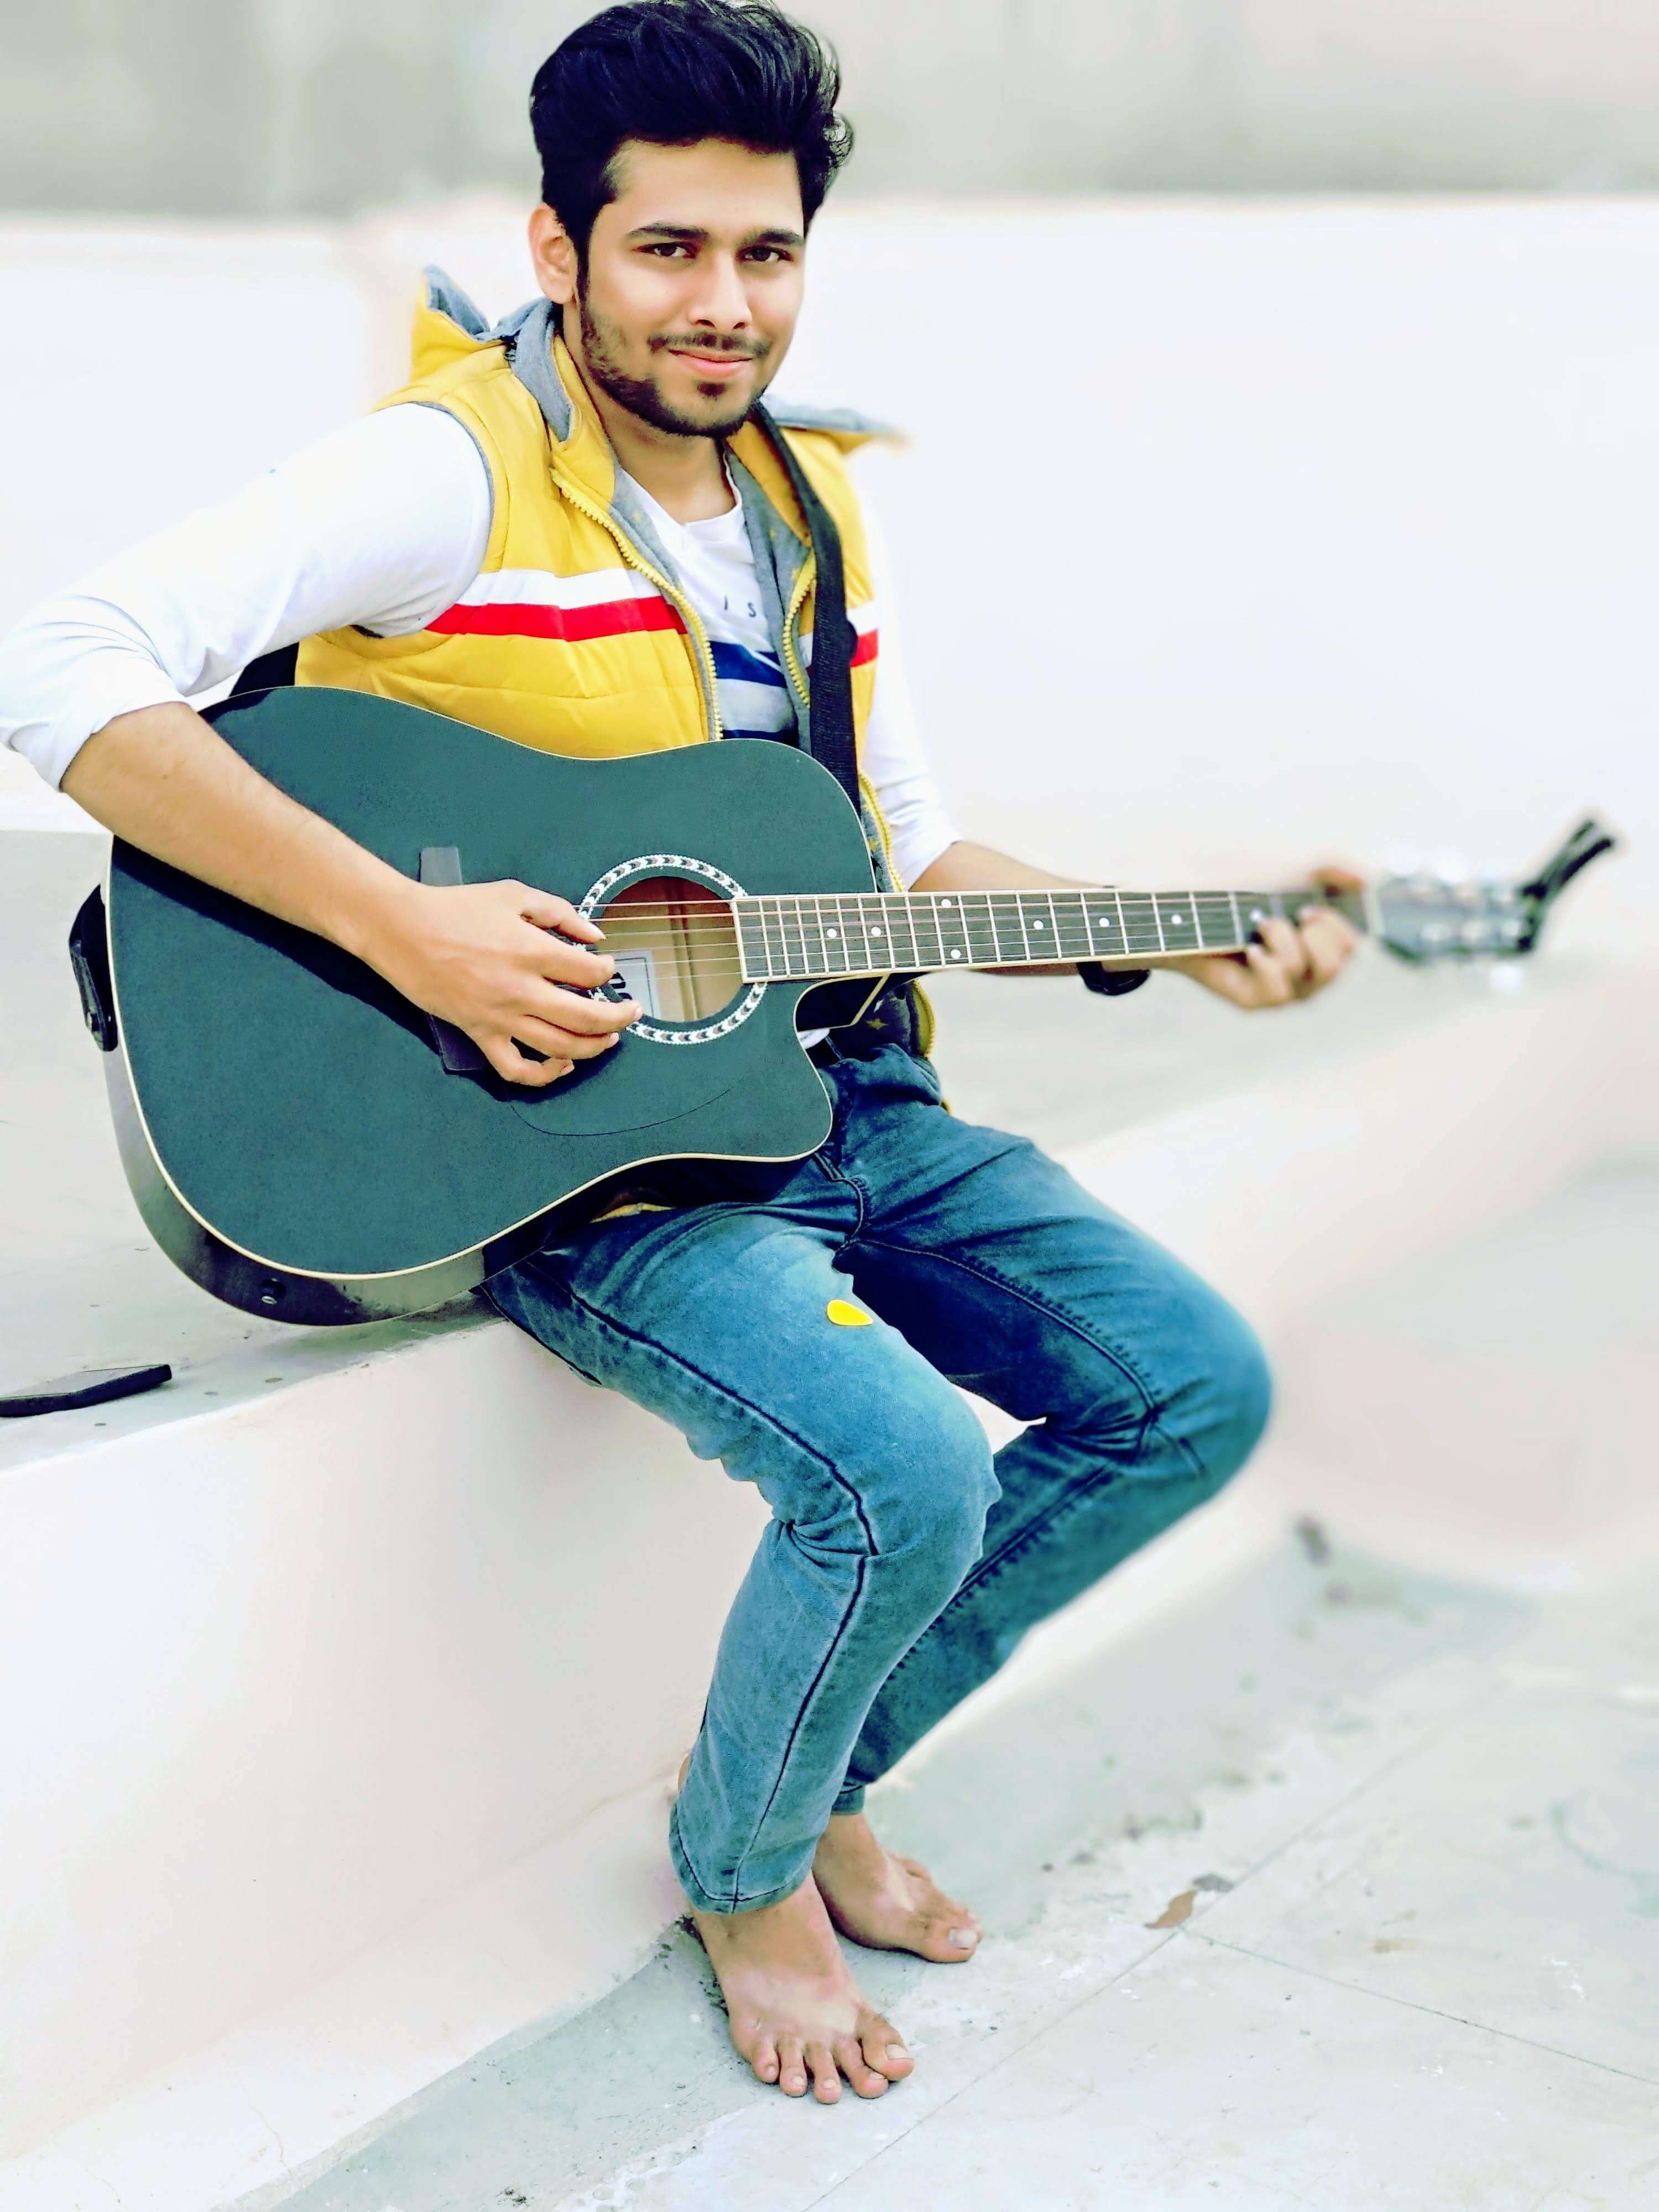 Ritwik playing guitar at rooftop